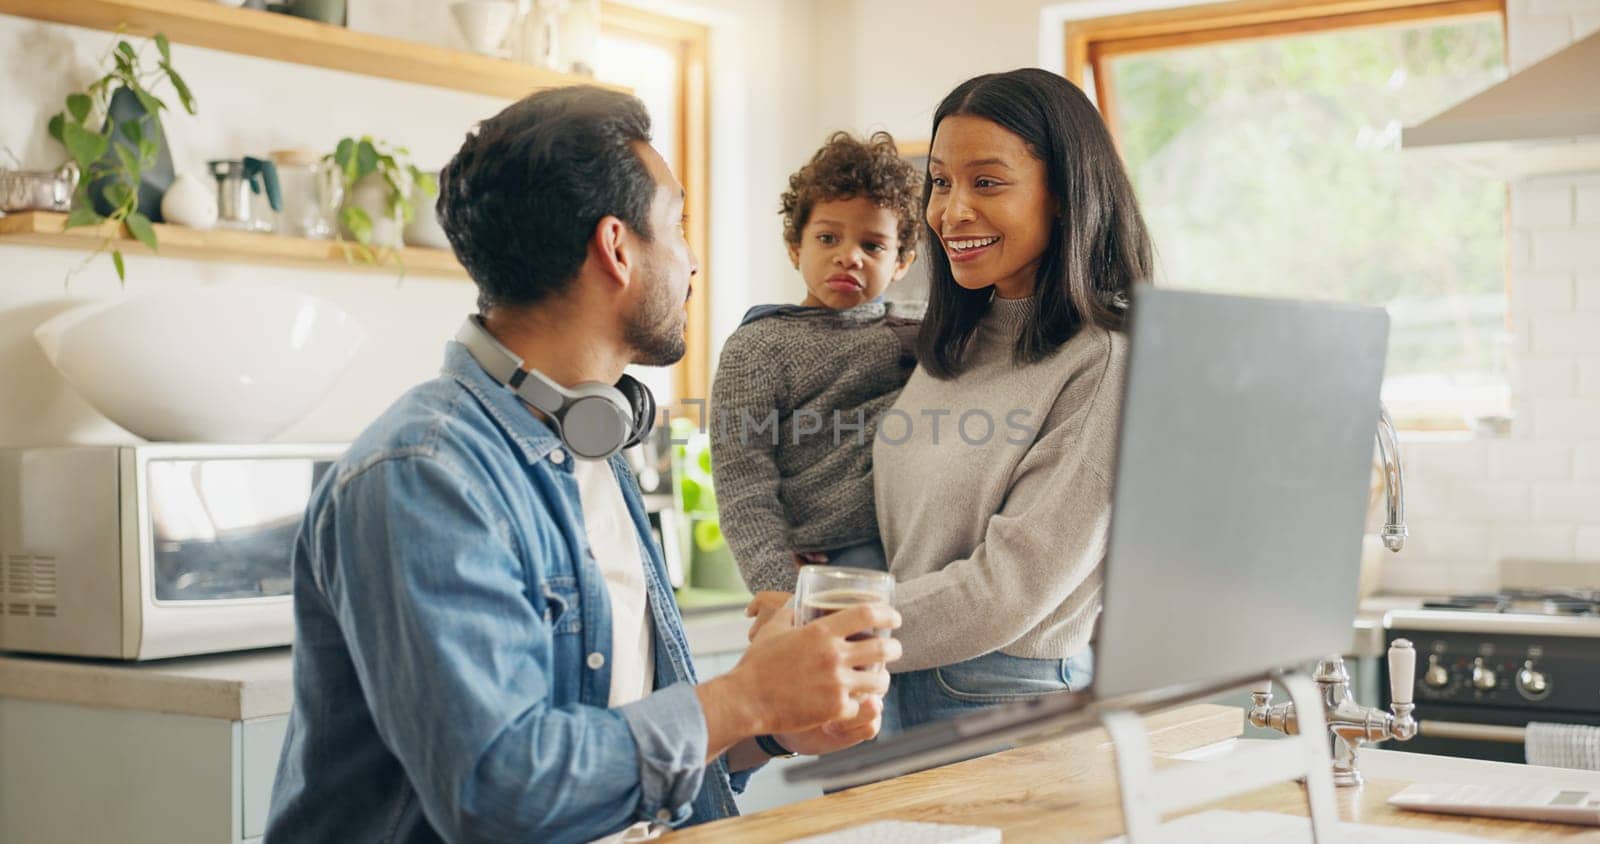 Kitchen, speaking and parents with a laptop, child and communication with internet connection, funny and chatting. Network, mother and father with technology, male child and conversation with humor.